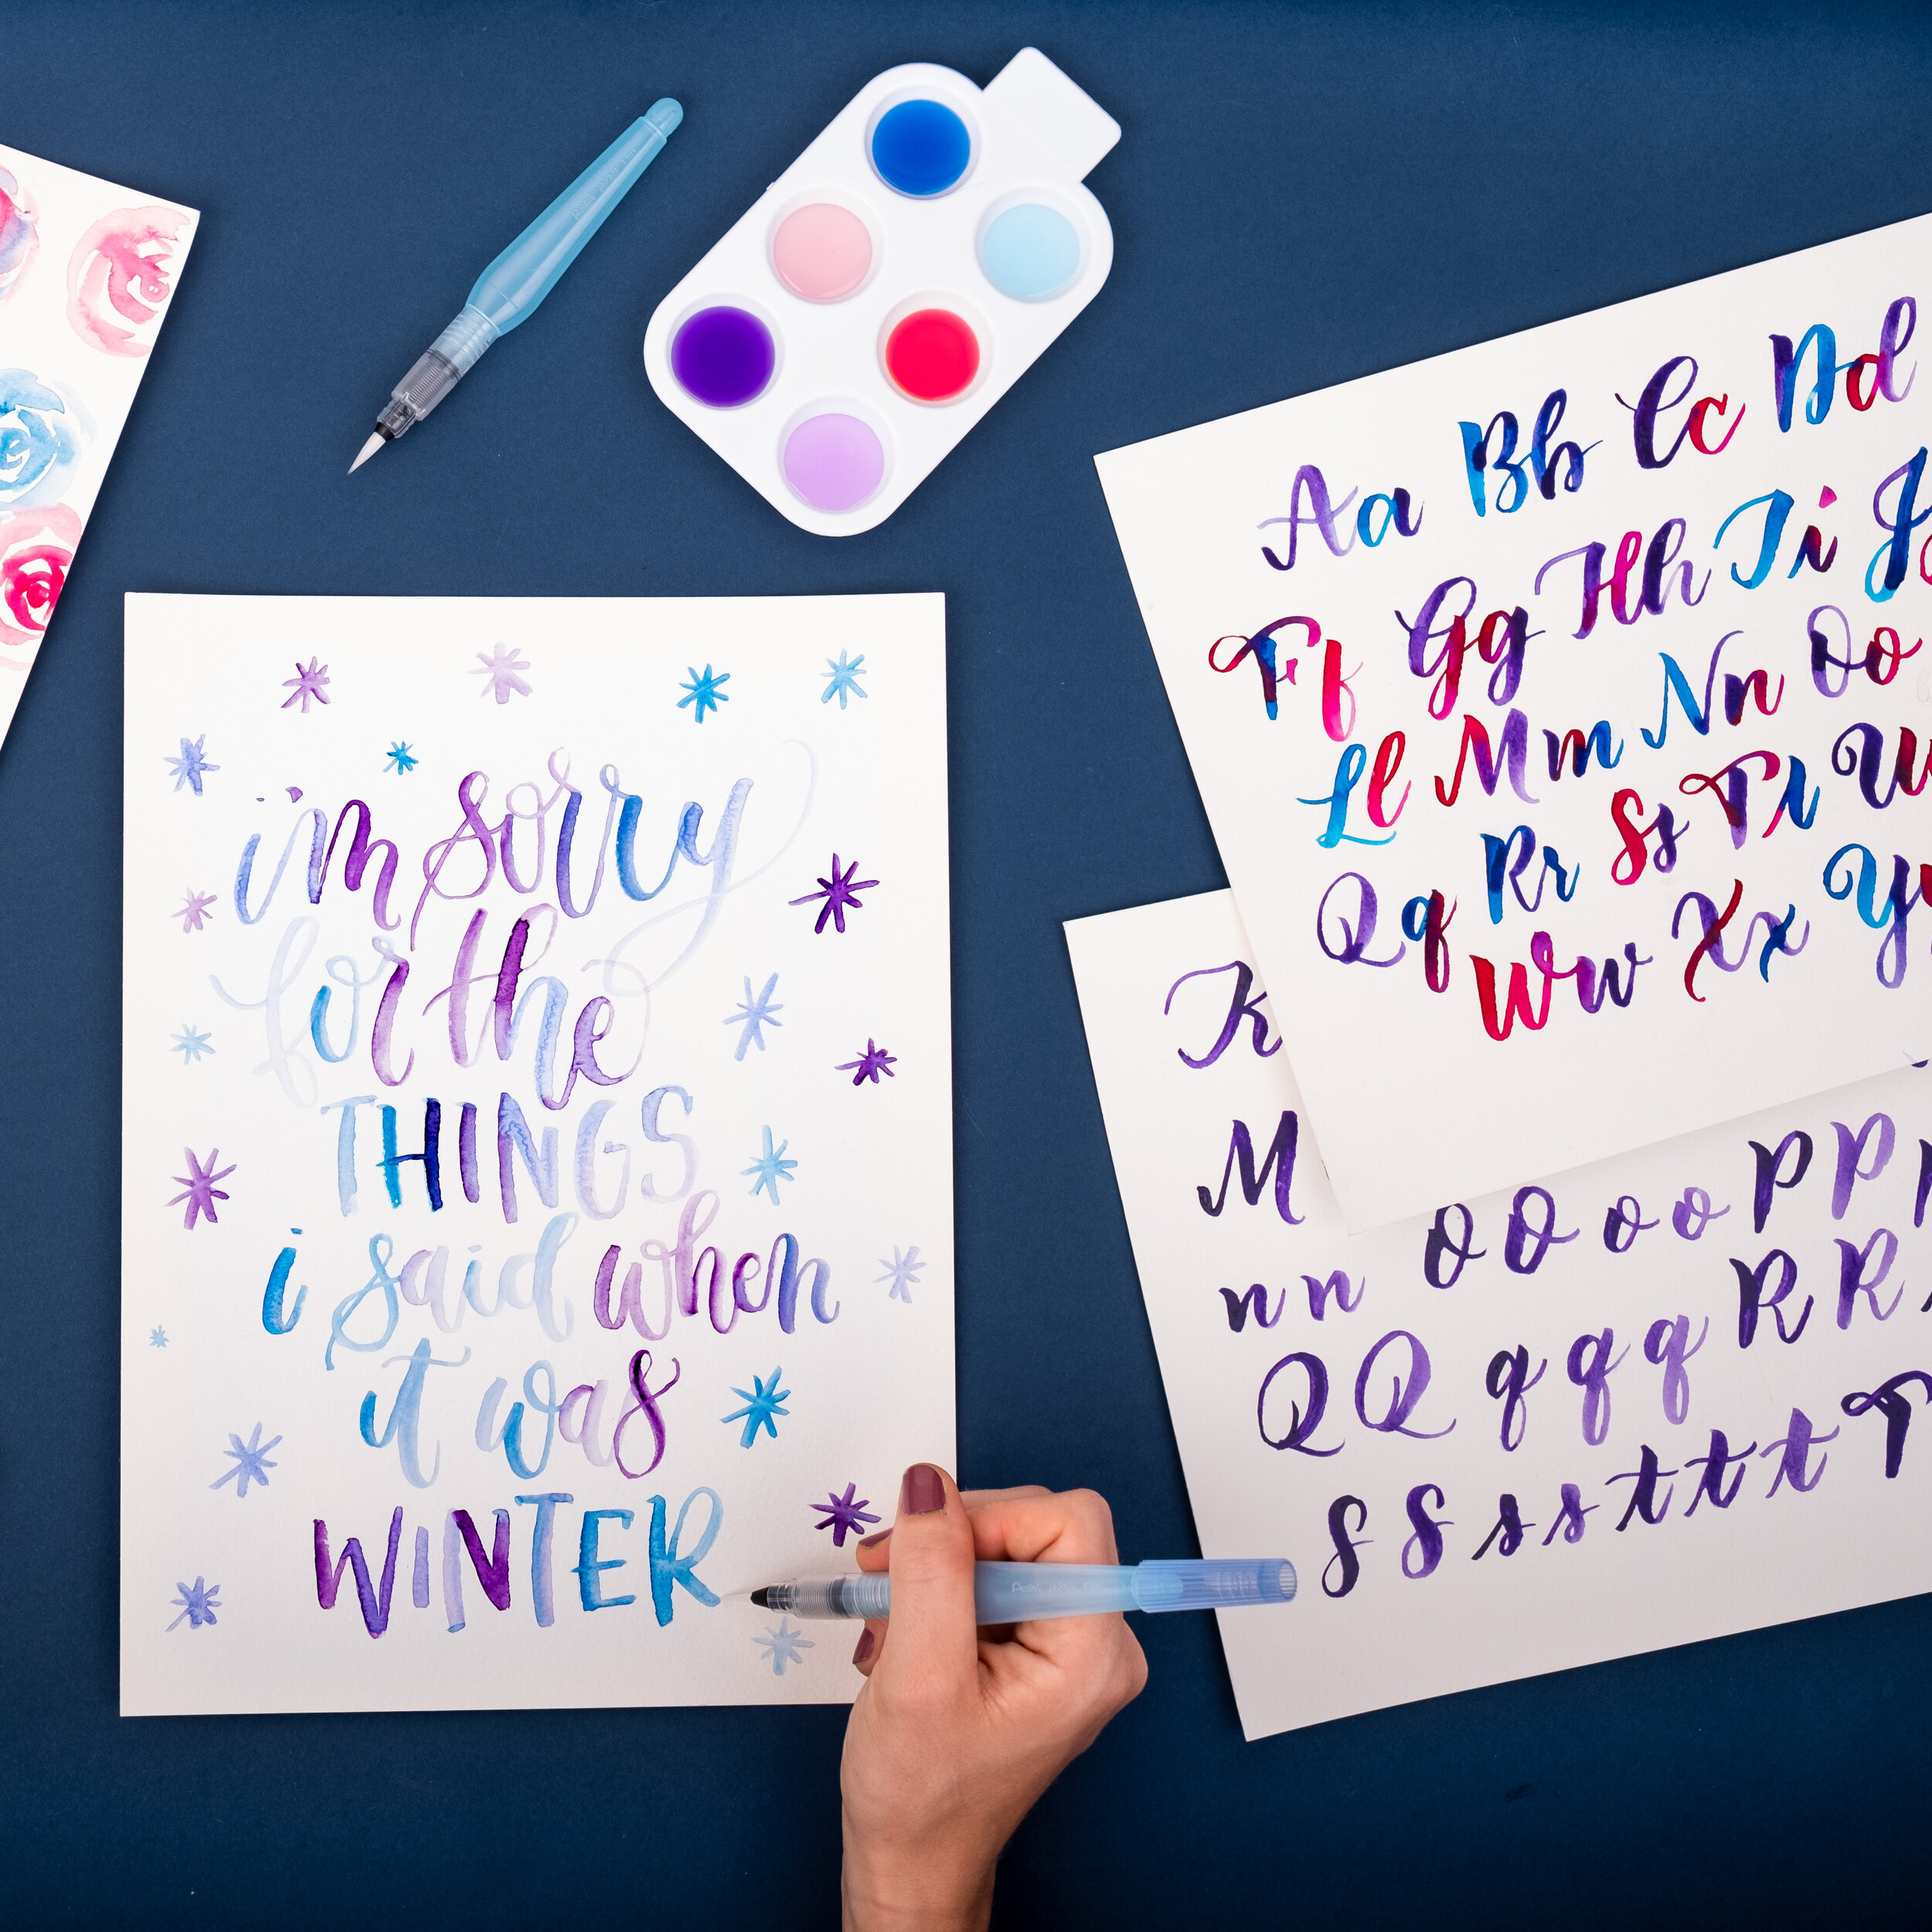 Brush lettering can come in handy for holiday cards.